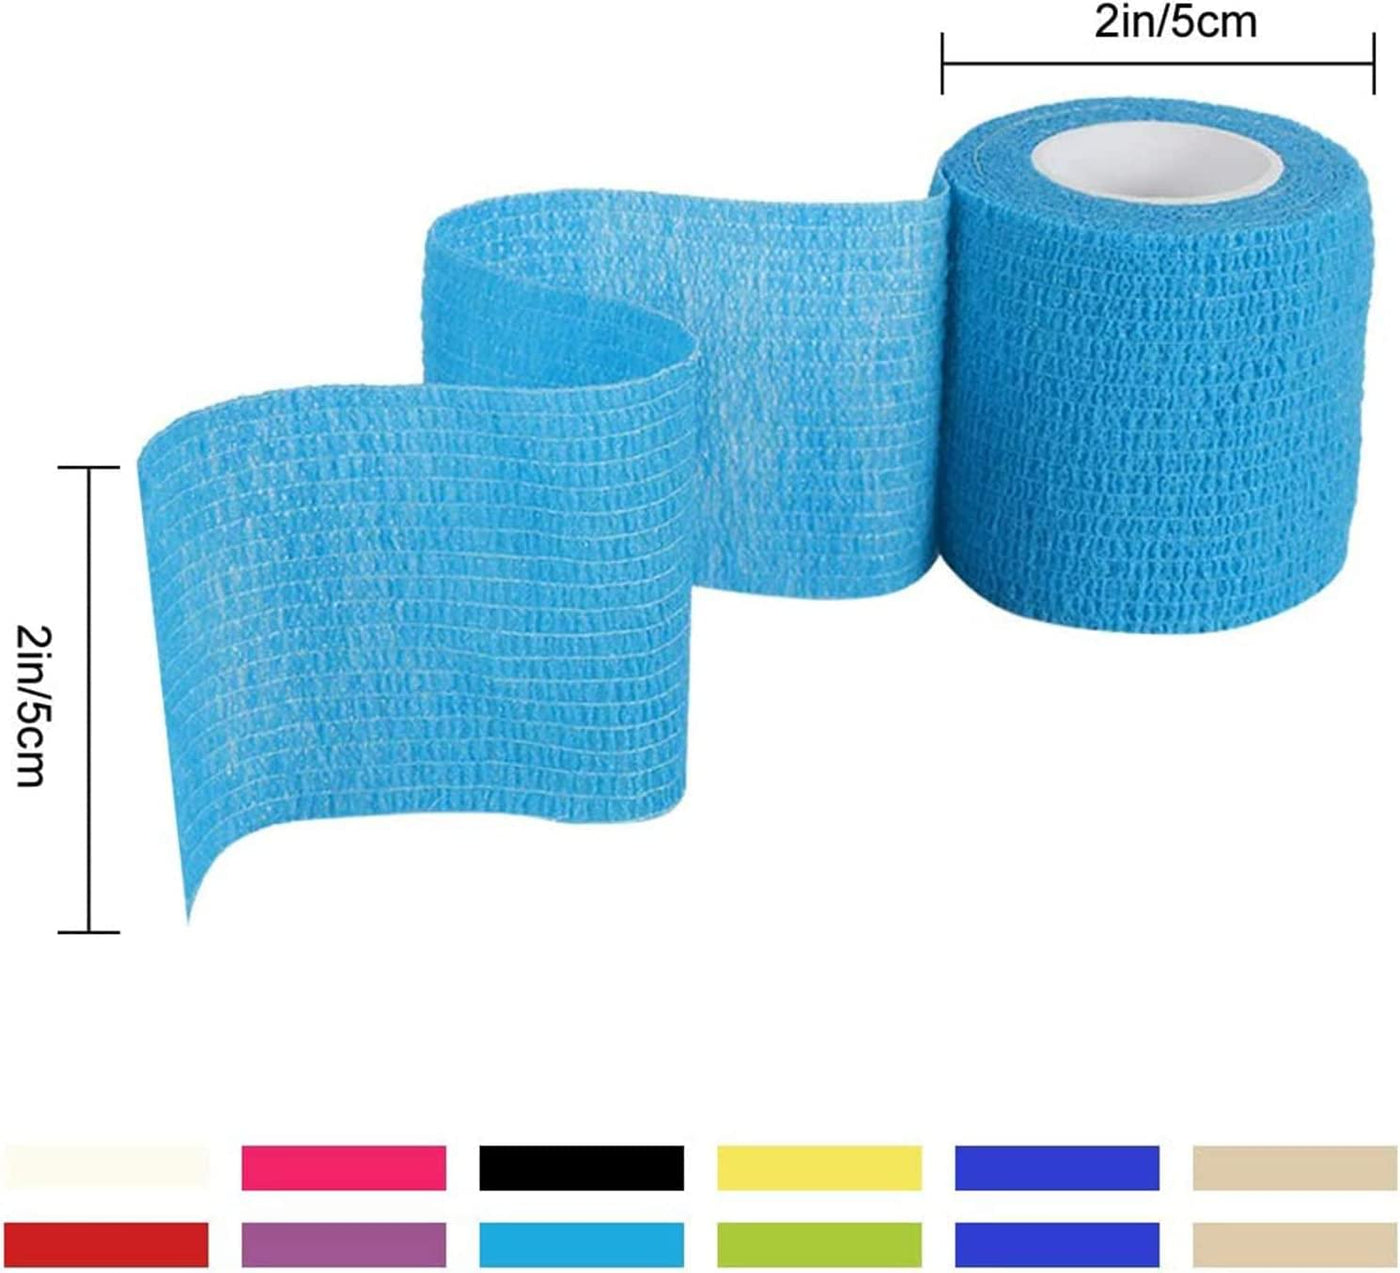 Dubkart Ankle support 12 Rolls Sprain Injury Bandages Sports Pets Wrap First Aid Tape